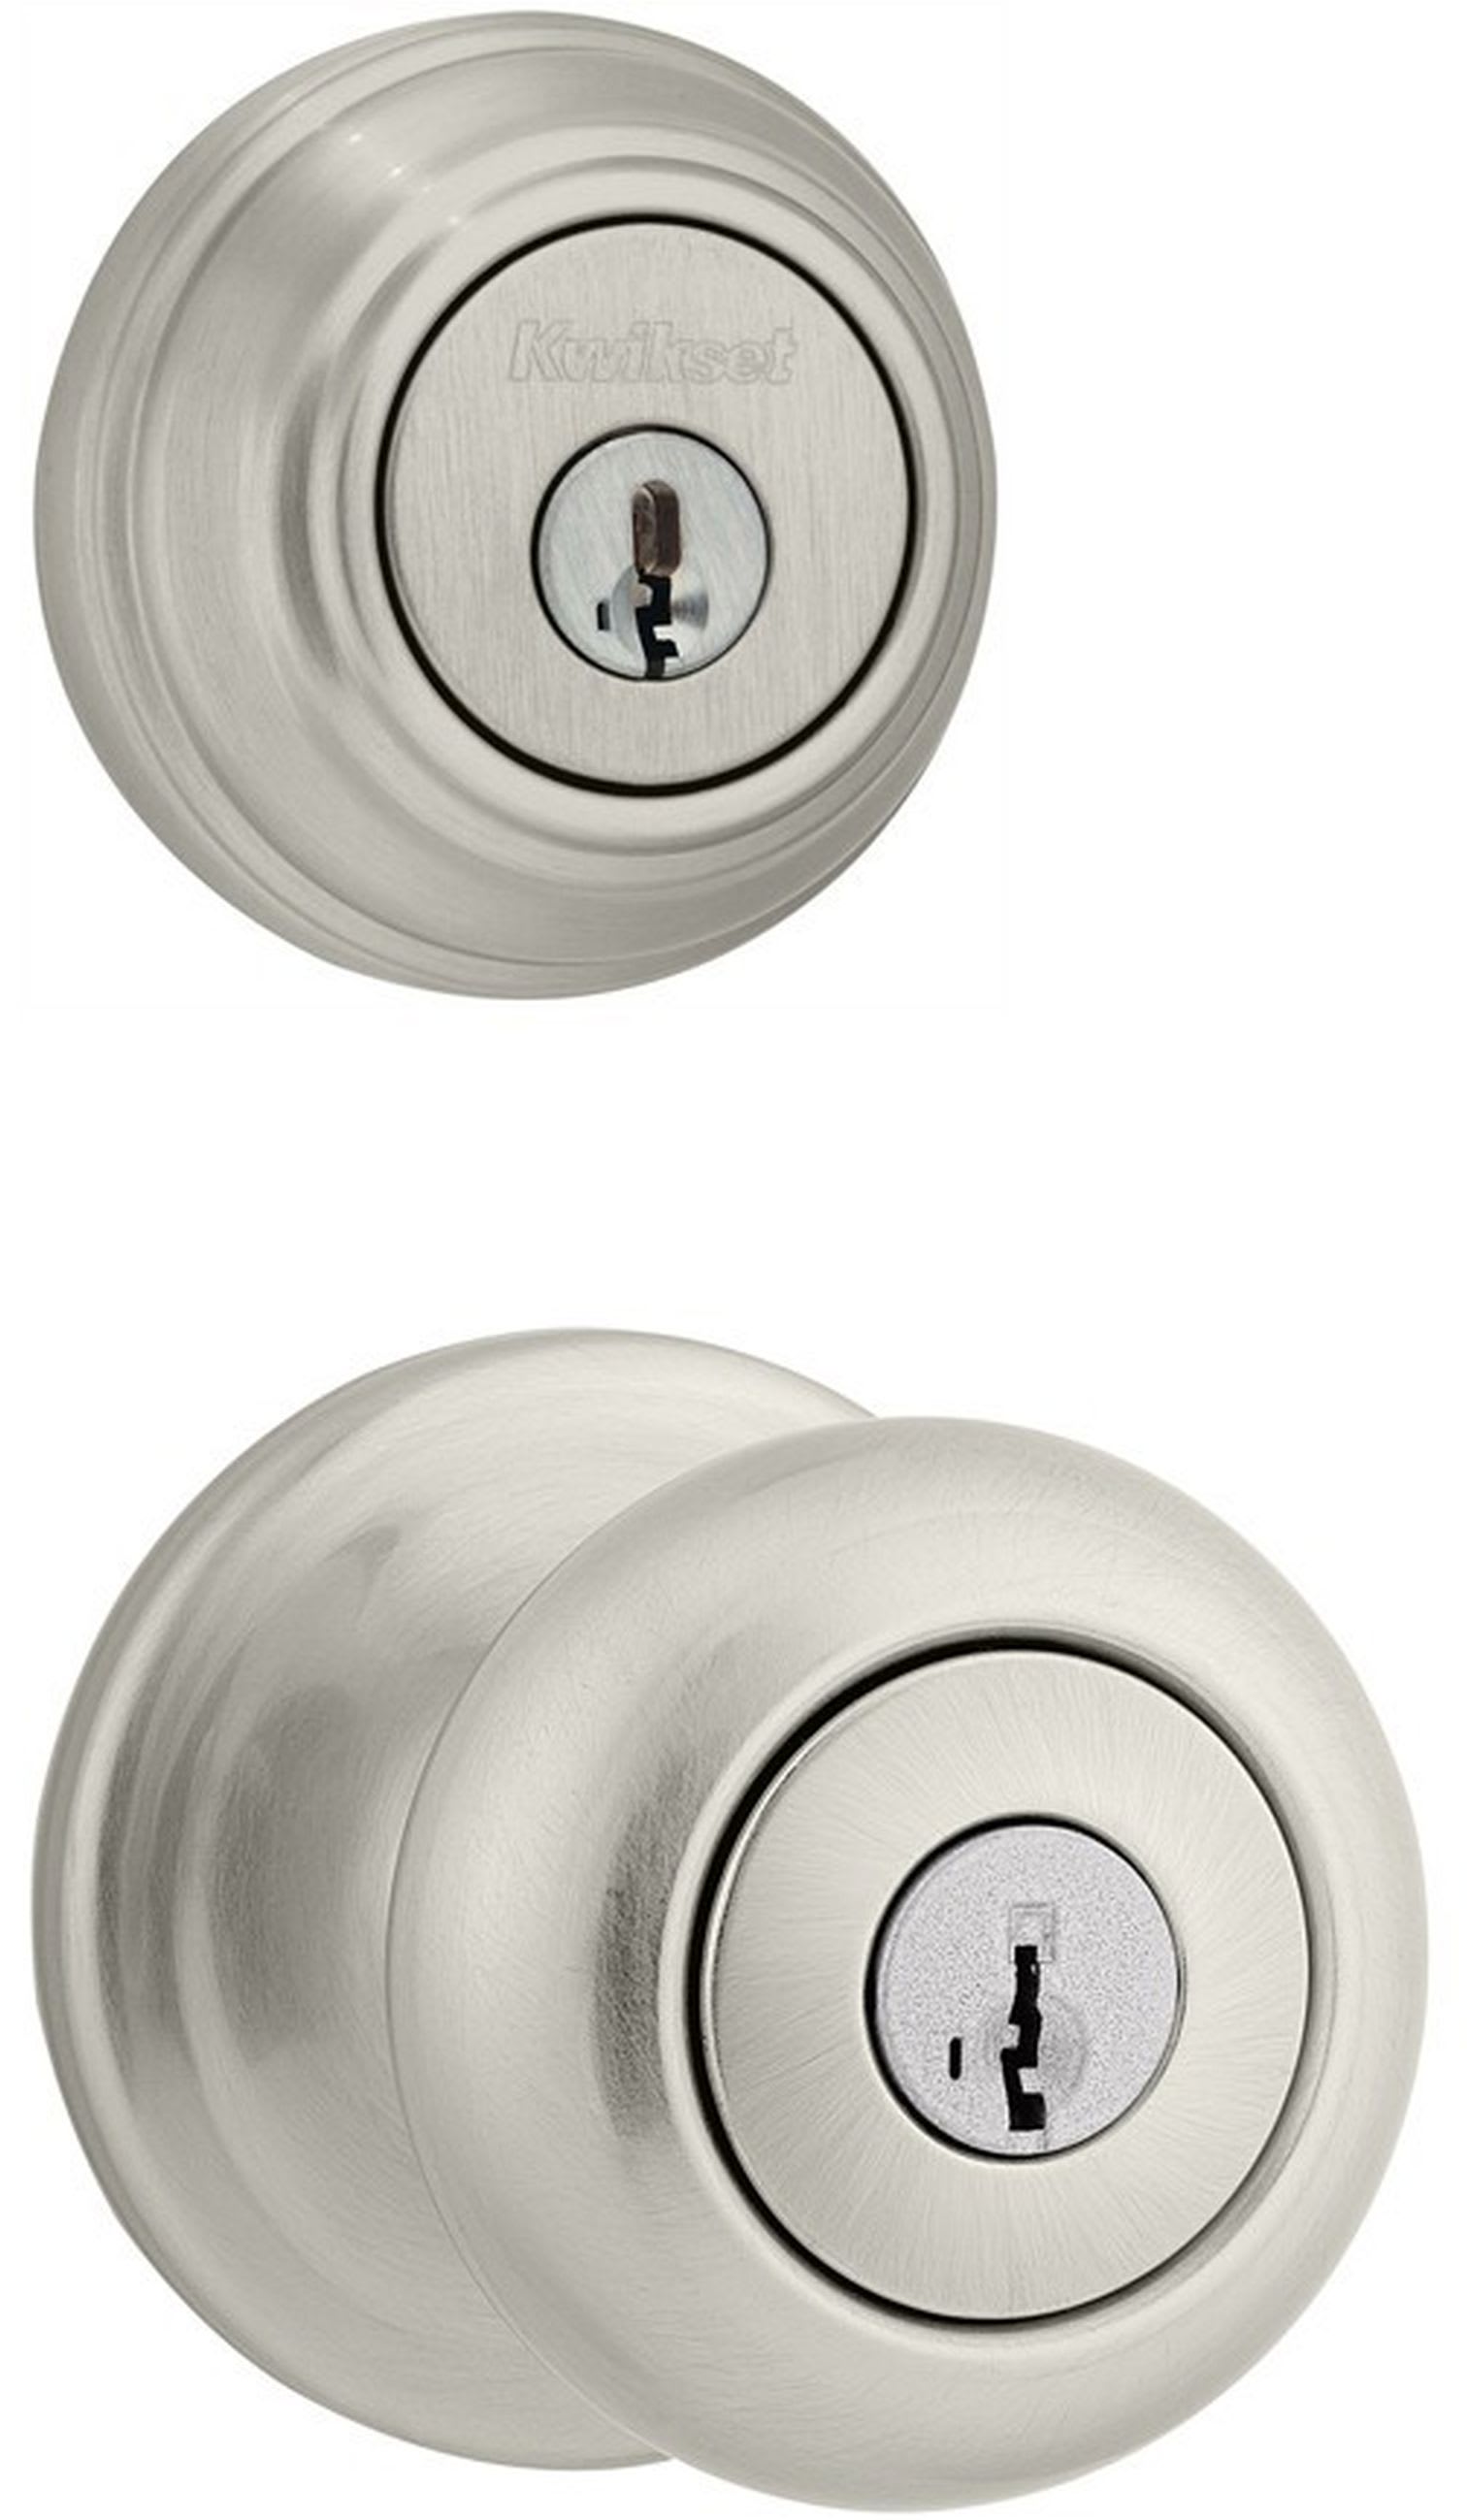 Kwikset CP740J-980-15S Satin Nickel Juno (Round Rosette) Knob and 980  Deadbolt Combo Pack with SmartKey